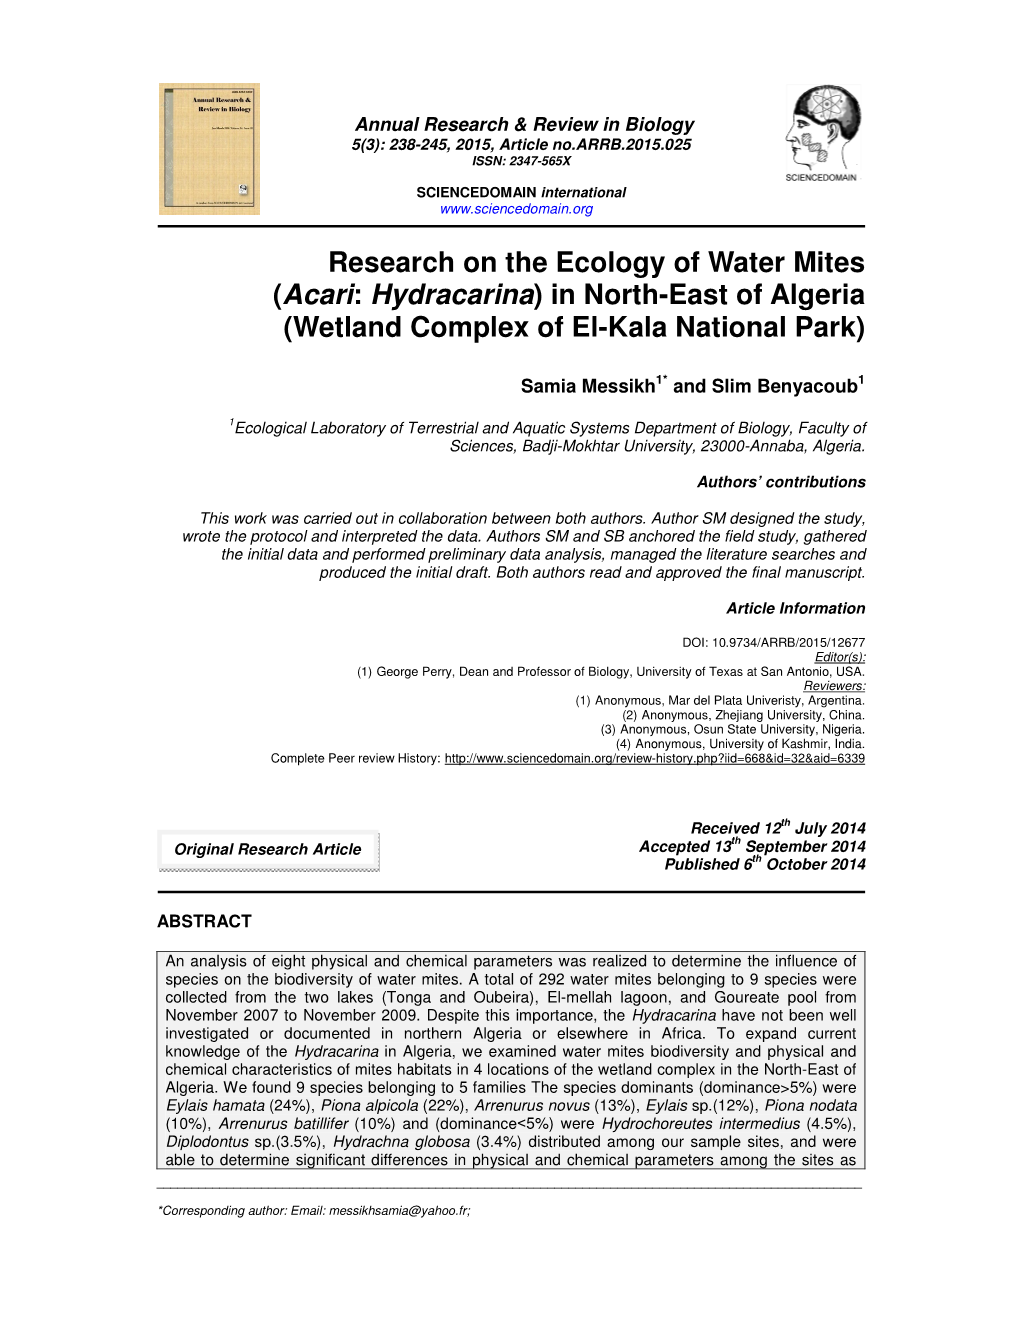 Research on the Ecology of Water Mites (Acari: Hydracarina) in North-East of Algeria (Wetland Complex of El-Kala National Park)